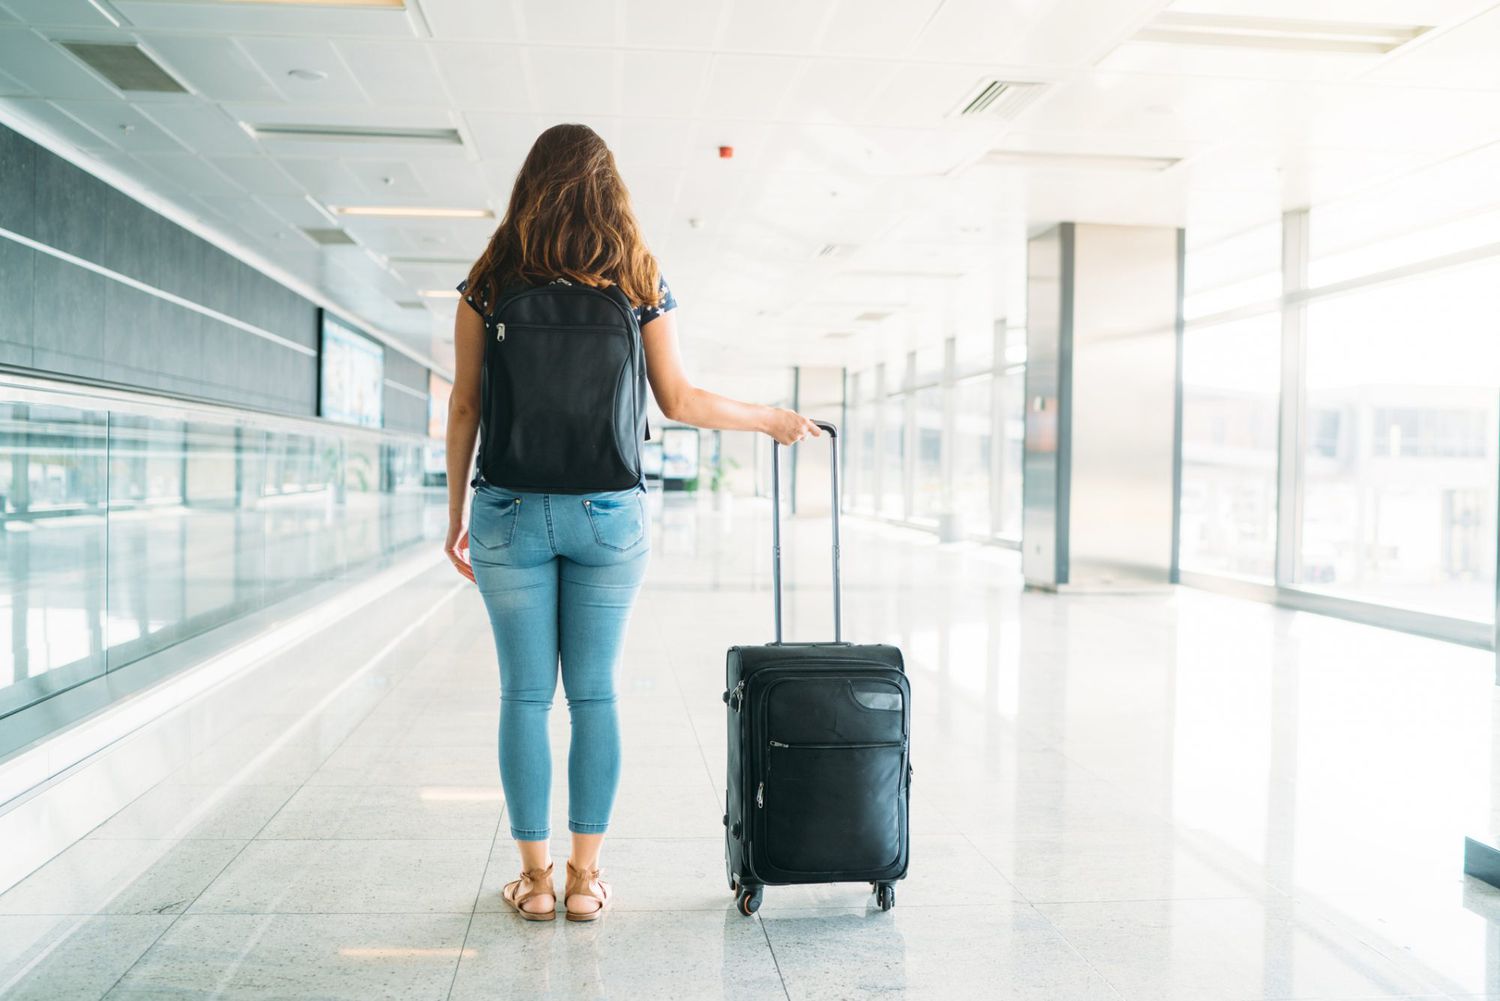 An image of a teen with a suitcase.